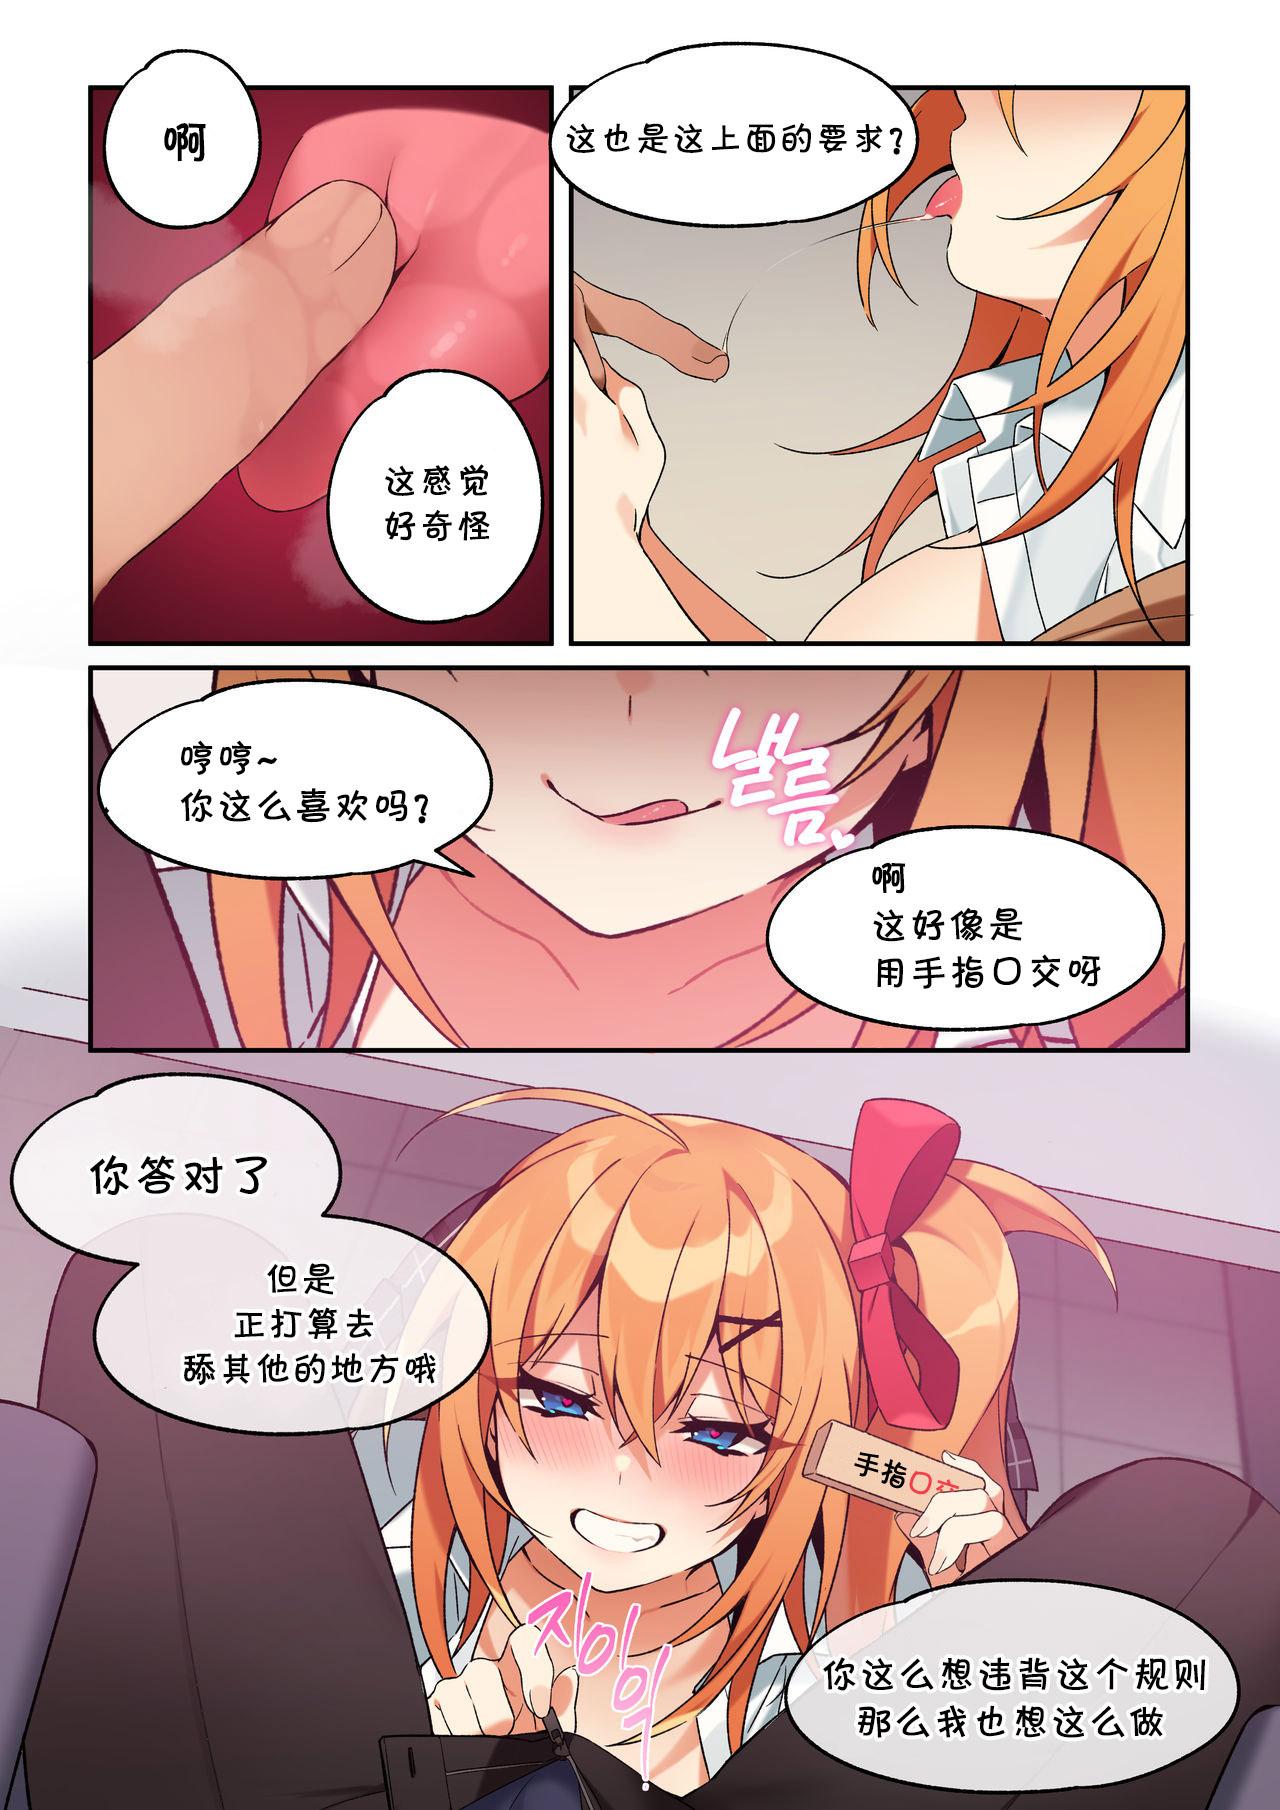 Grosso Kalina - Girls frontline Amateur Sex - Page 7